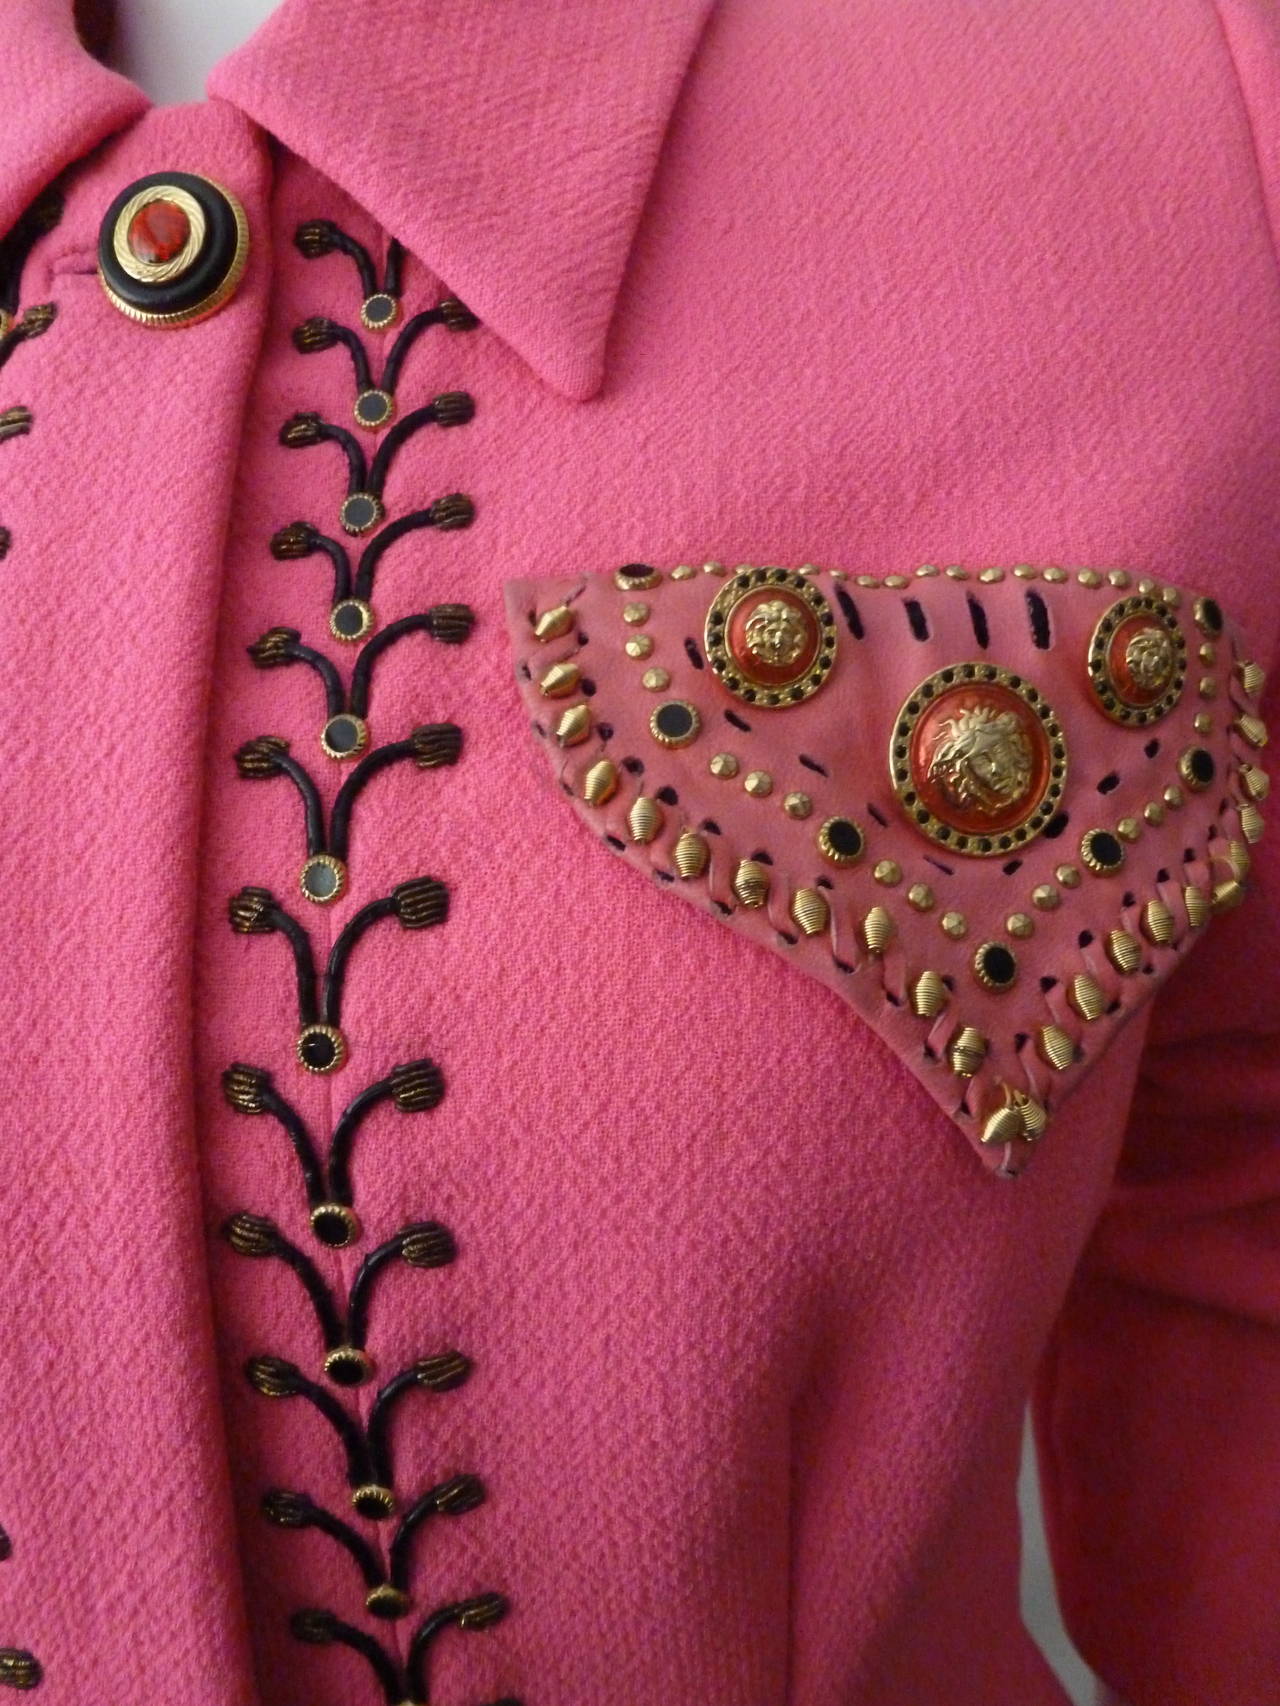 Iconic and rare Atelier Versace shocking pink wool crepe cowboy western inspired jacket from the Fall 1992 Atelier Bondage collection, shown at The Ritz in Paris.

The jacket features black thong embroidery, edged with gilt purl wire tassels,